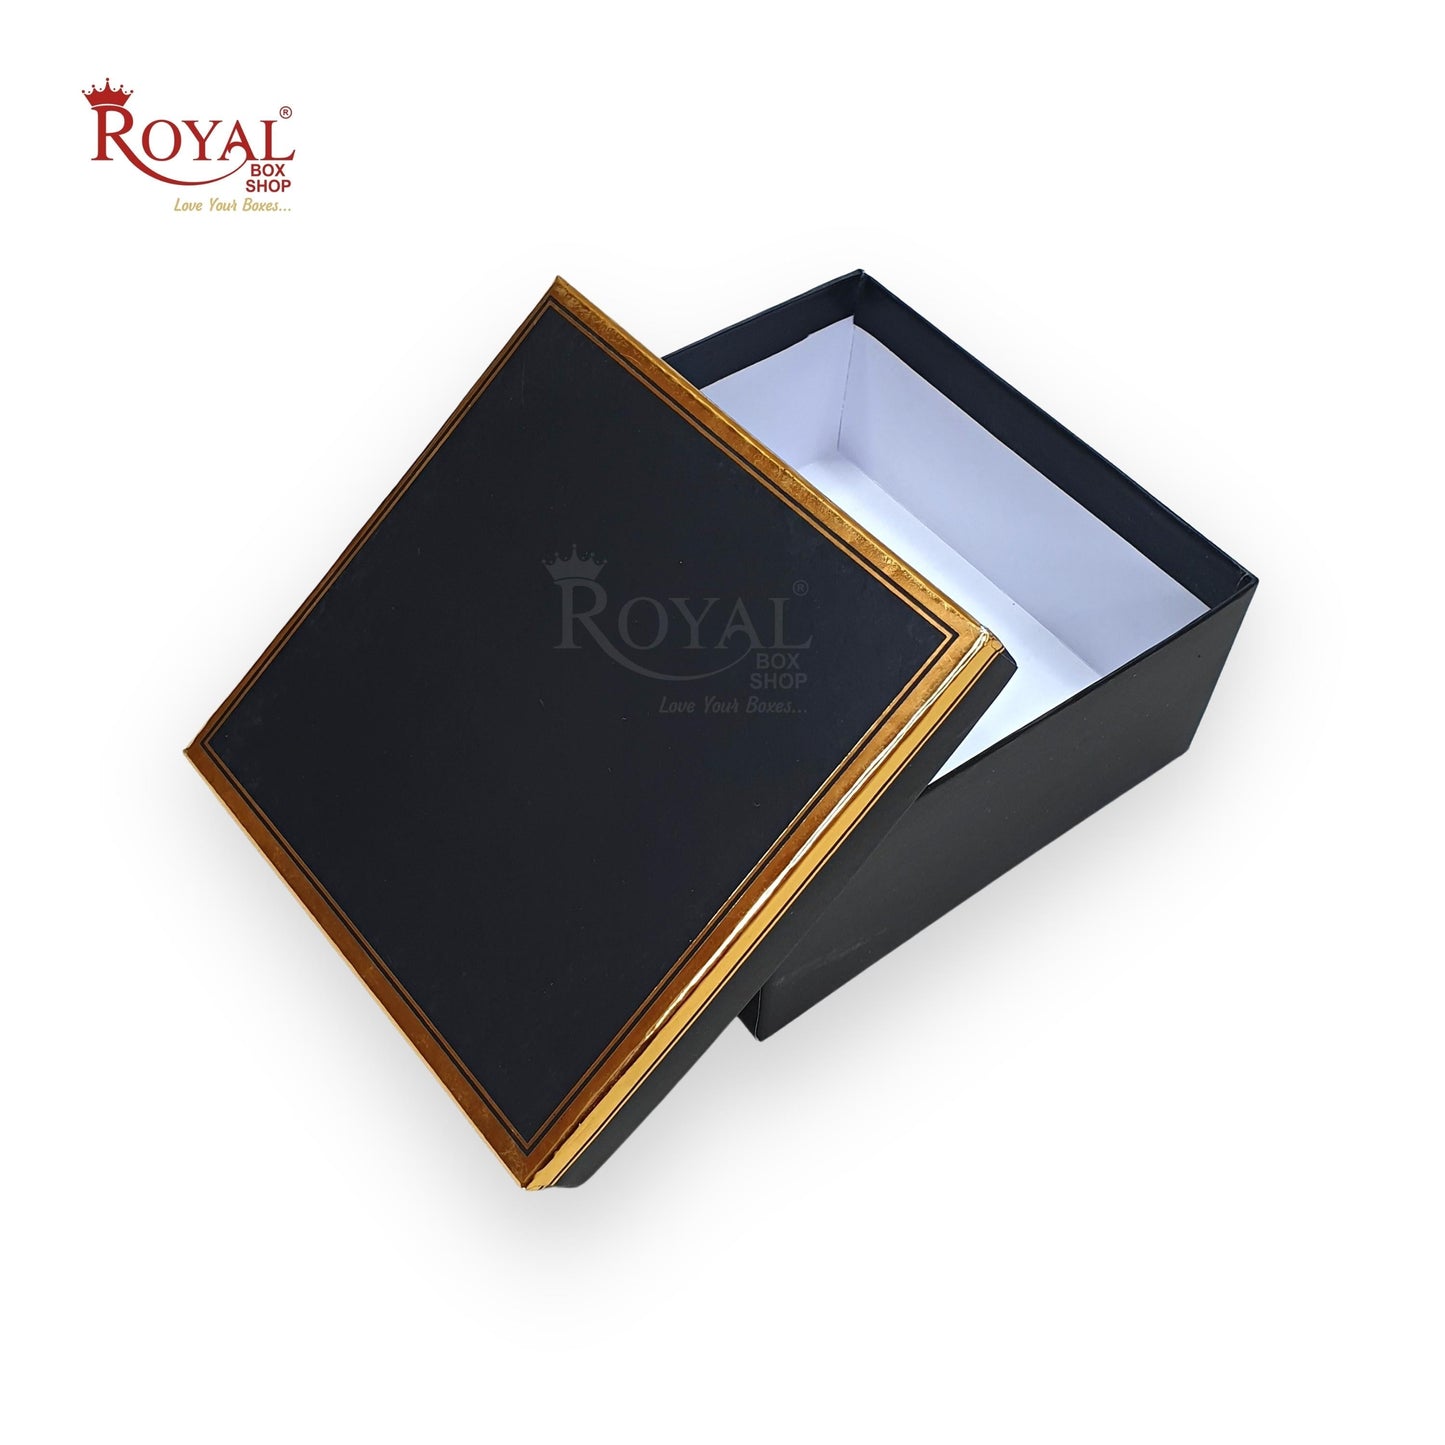 Hamper Gift Boxes I 7x7x3.5 Inches I Black with Gold Foiling I For Return Wedding Corporate Hamper Gifts Box Royal Box Shop